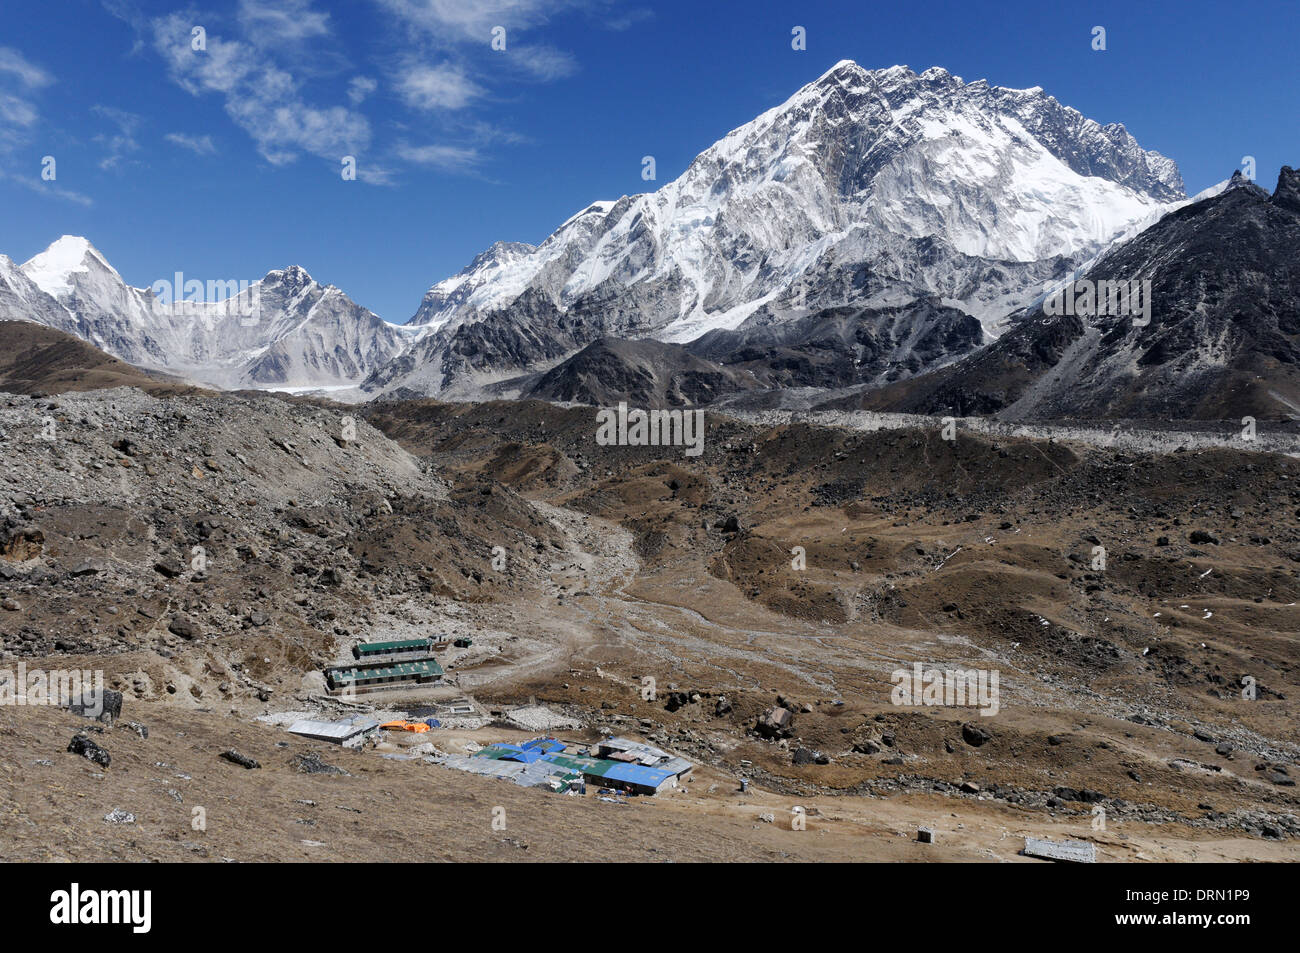 THe himalayan village of Gorak Shep, the last stop on the Everest Base camp trek in Nepal Stock Photo